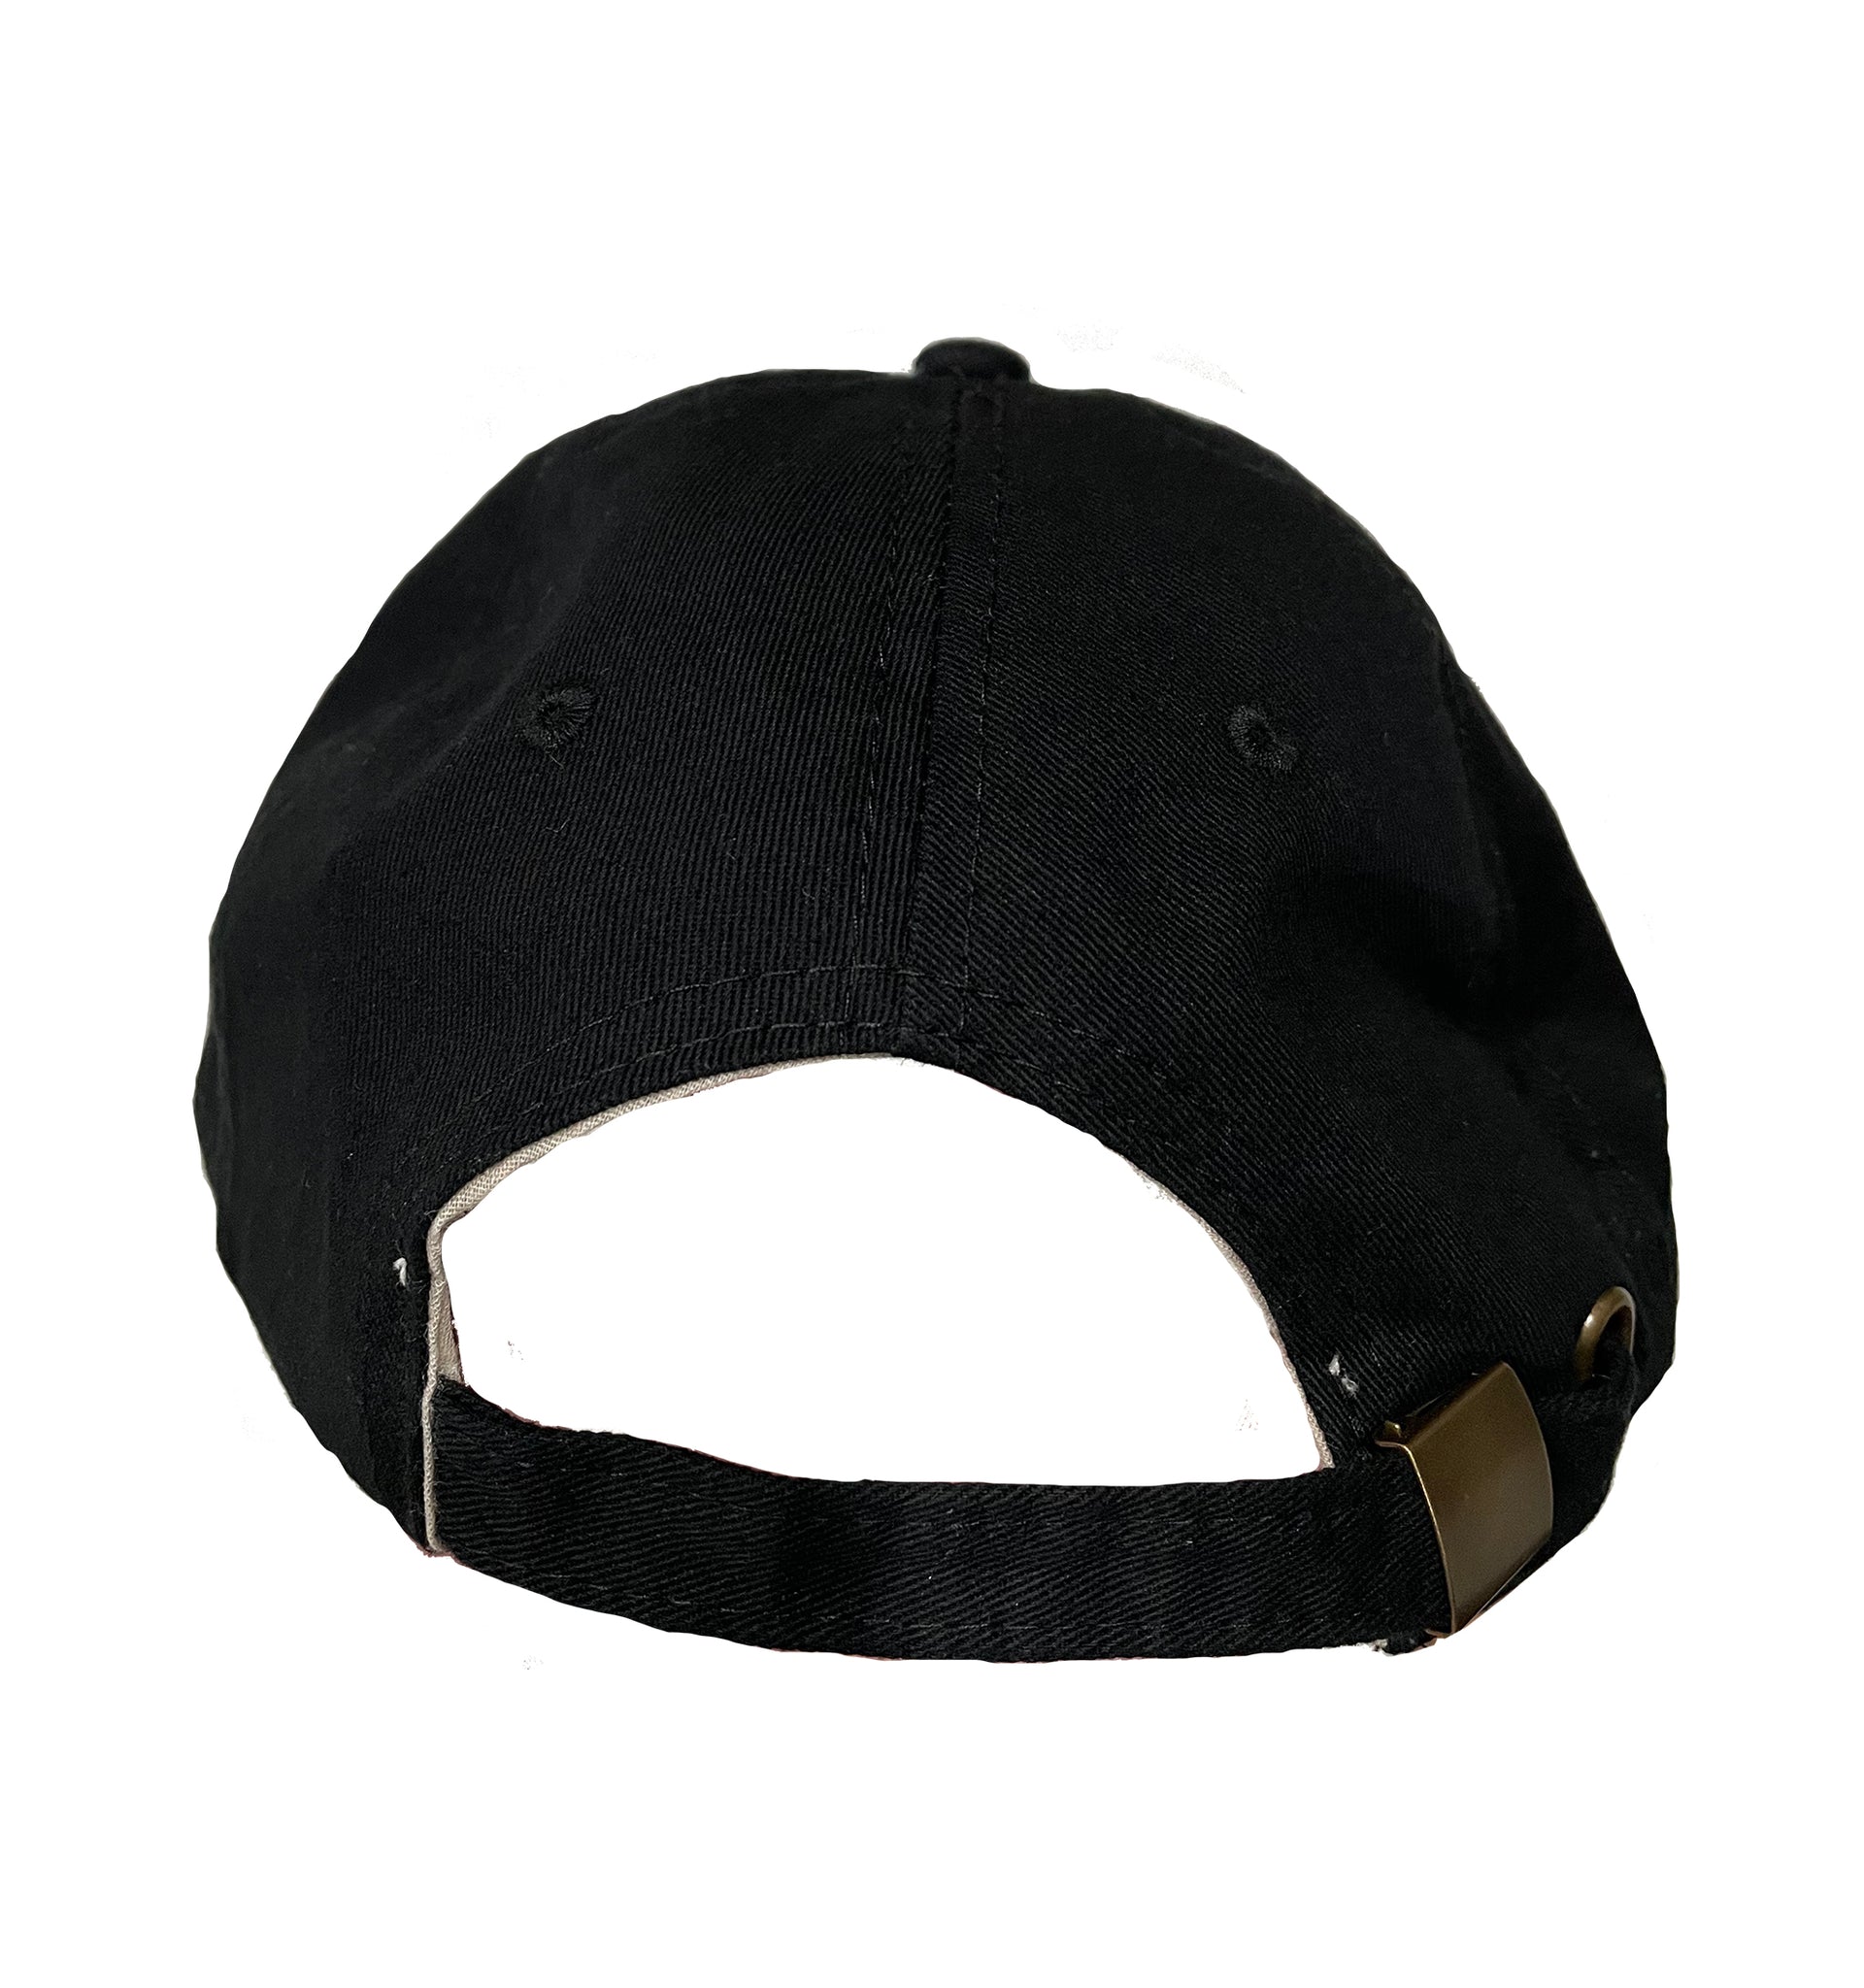 Spoke Black Embroidered Washed Chino Twill Cap